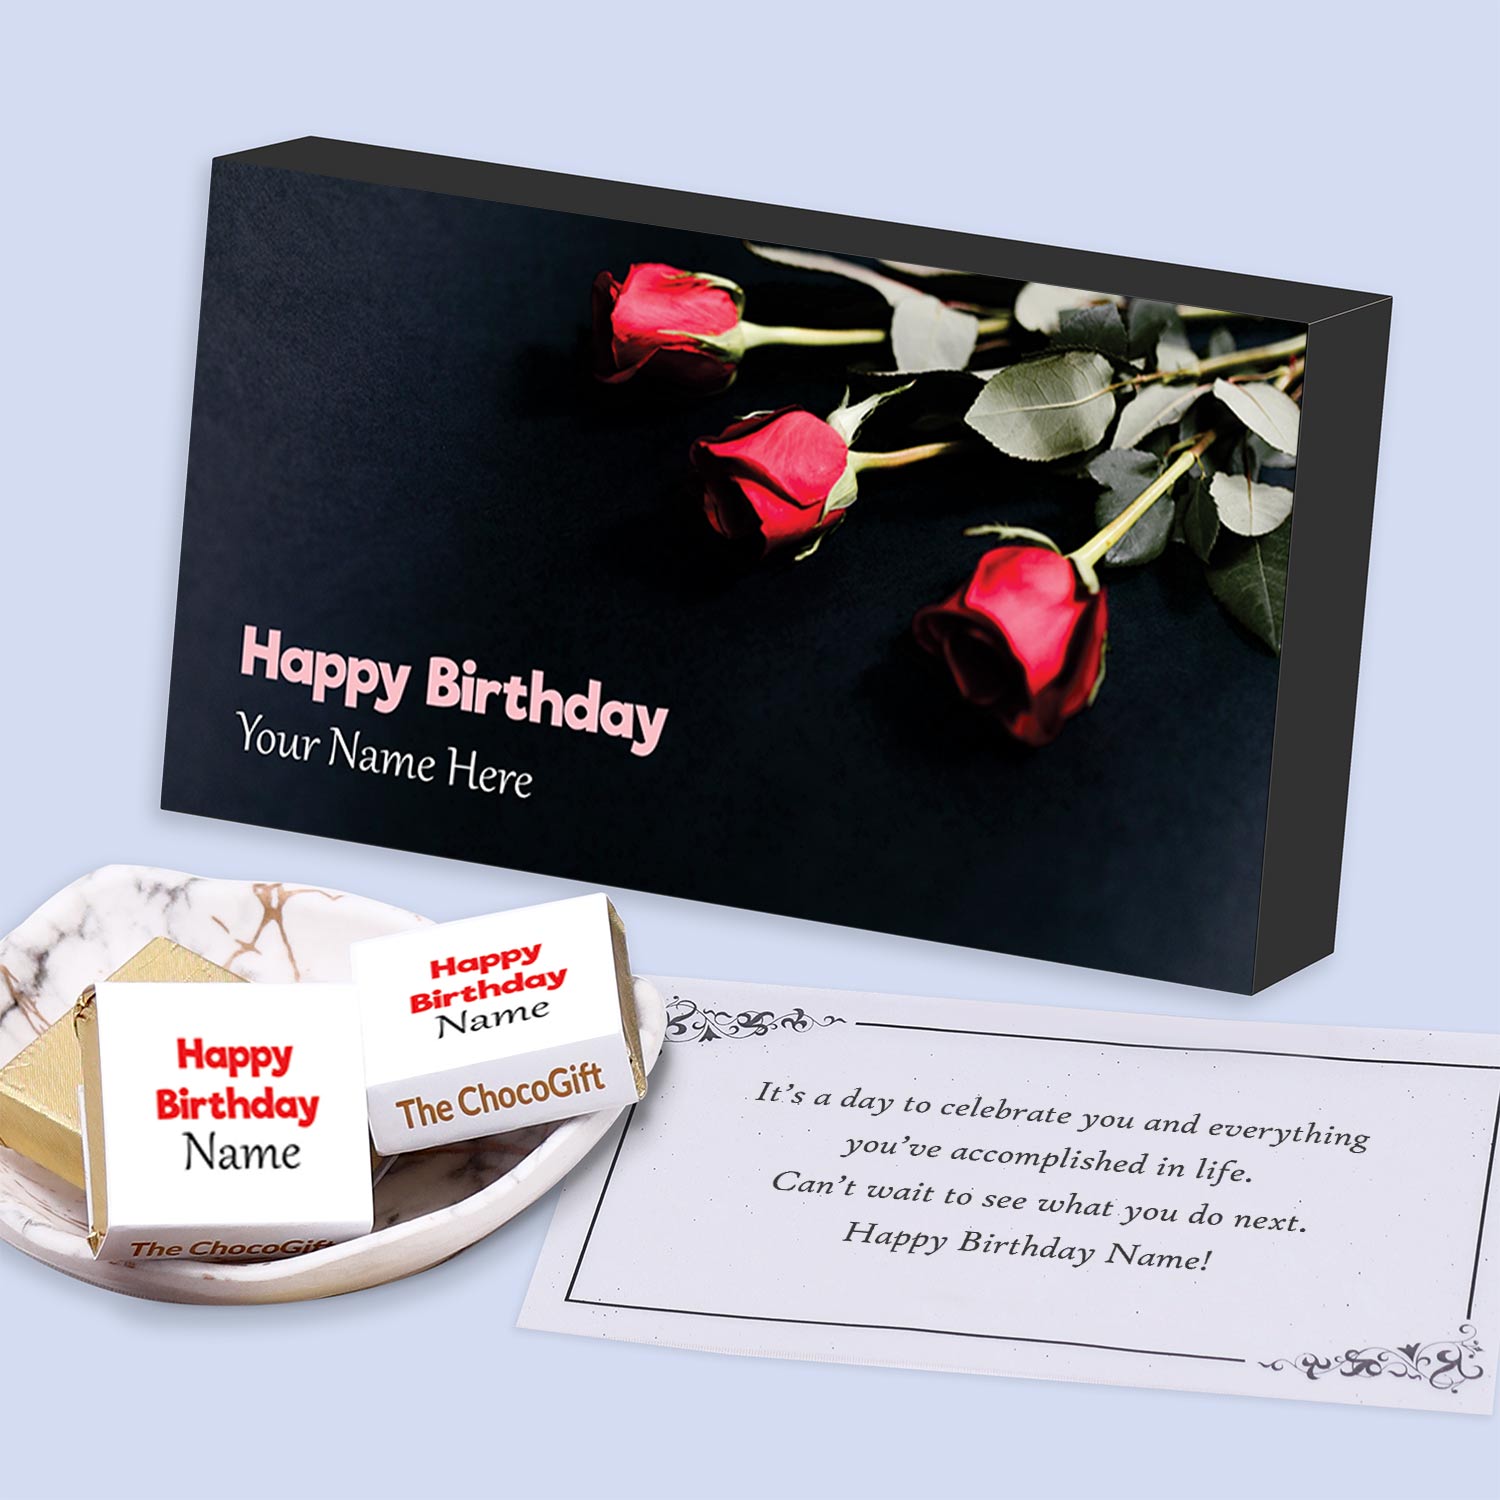 Birthday Gifts | Birthday Gift Delivery | Edible Arrangements